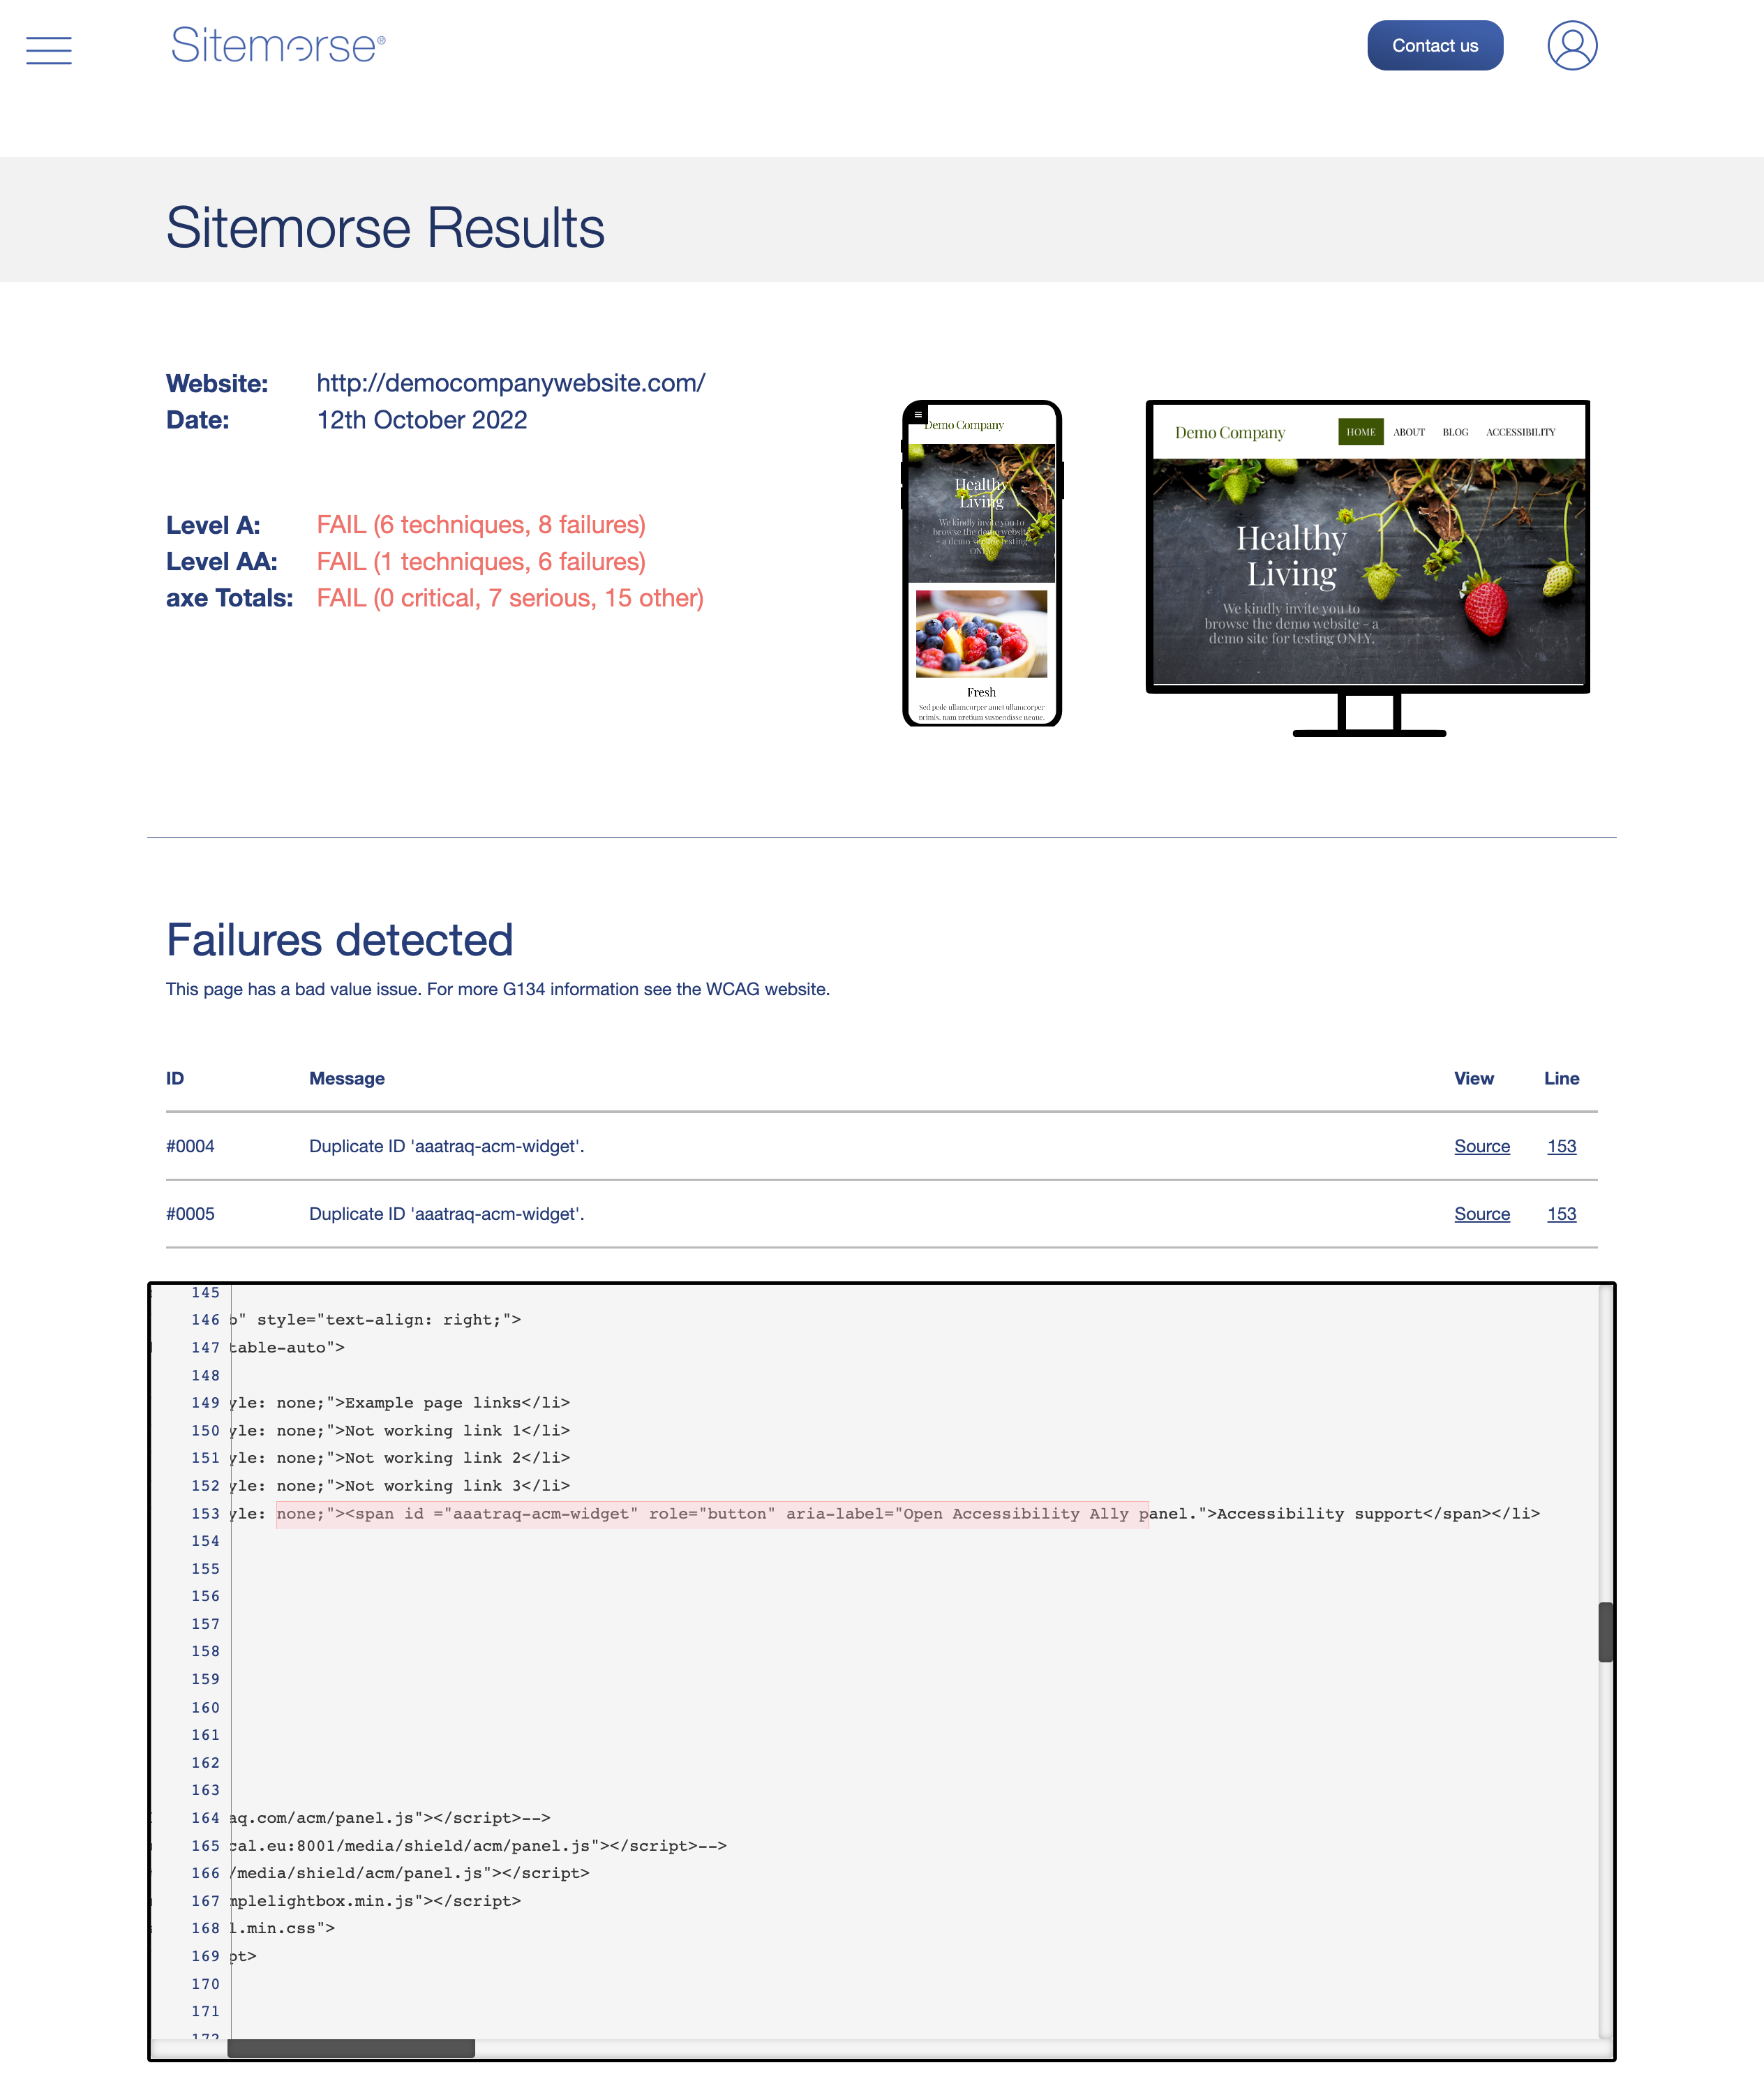 Screenshot of Sitemorse Check Page Showing Additional Diagnostic Detail